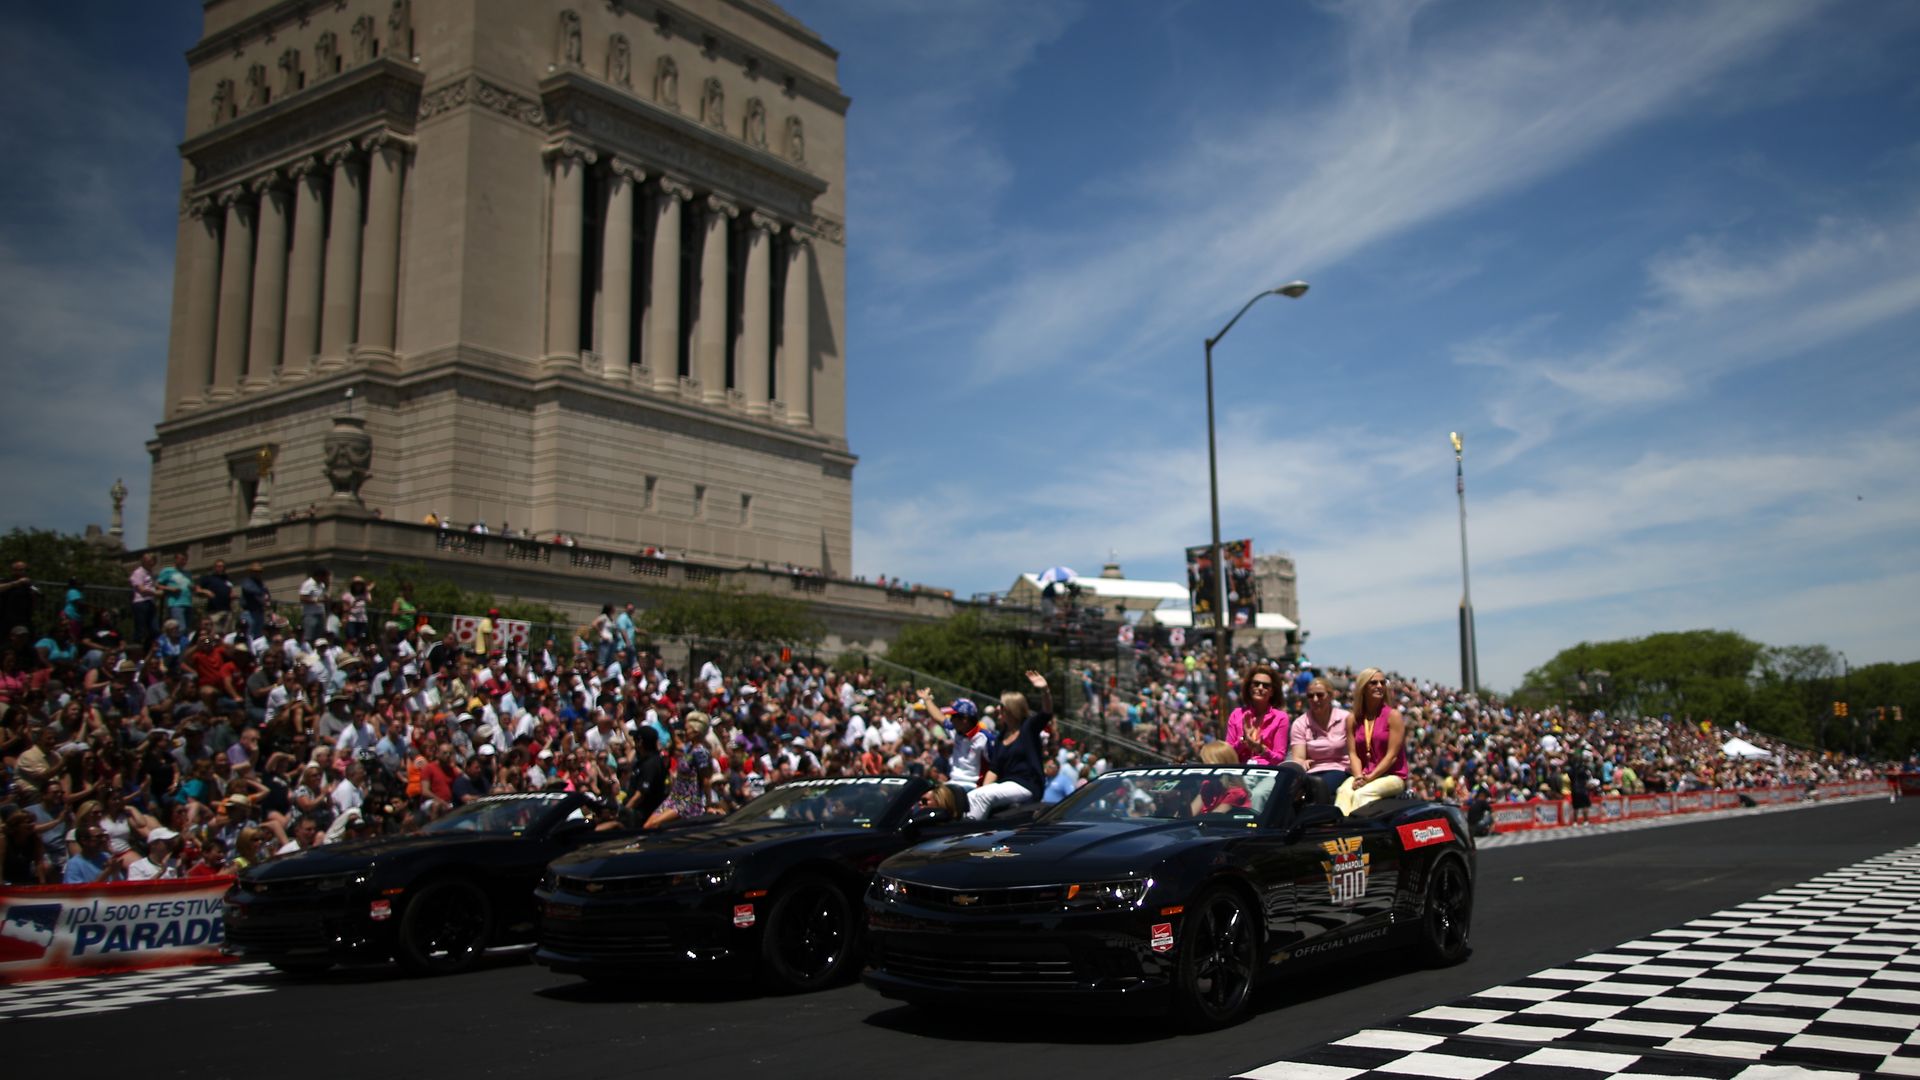 A crowd looks on as cars drive past a checkered road